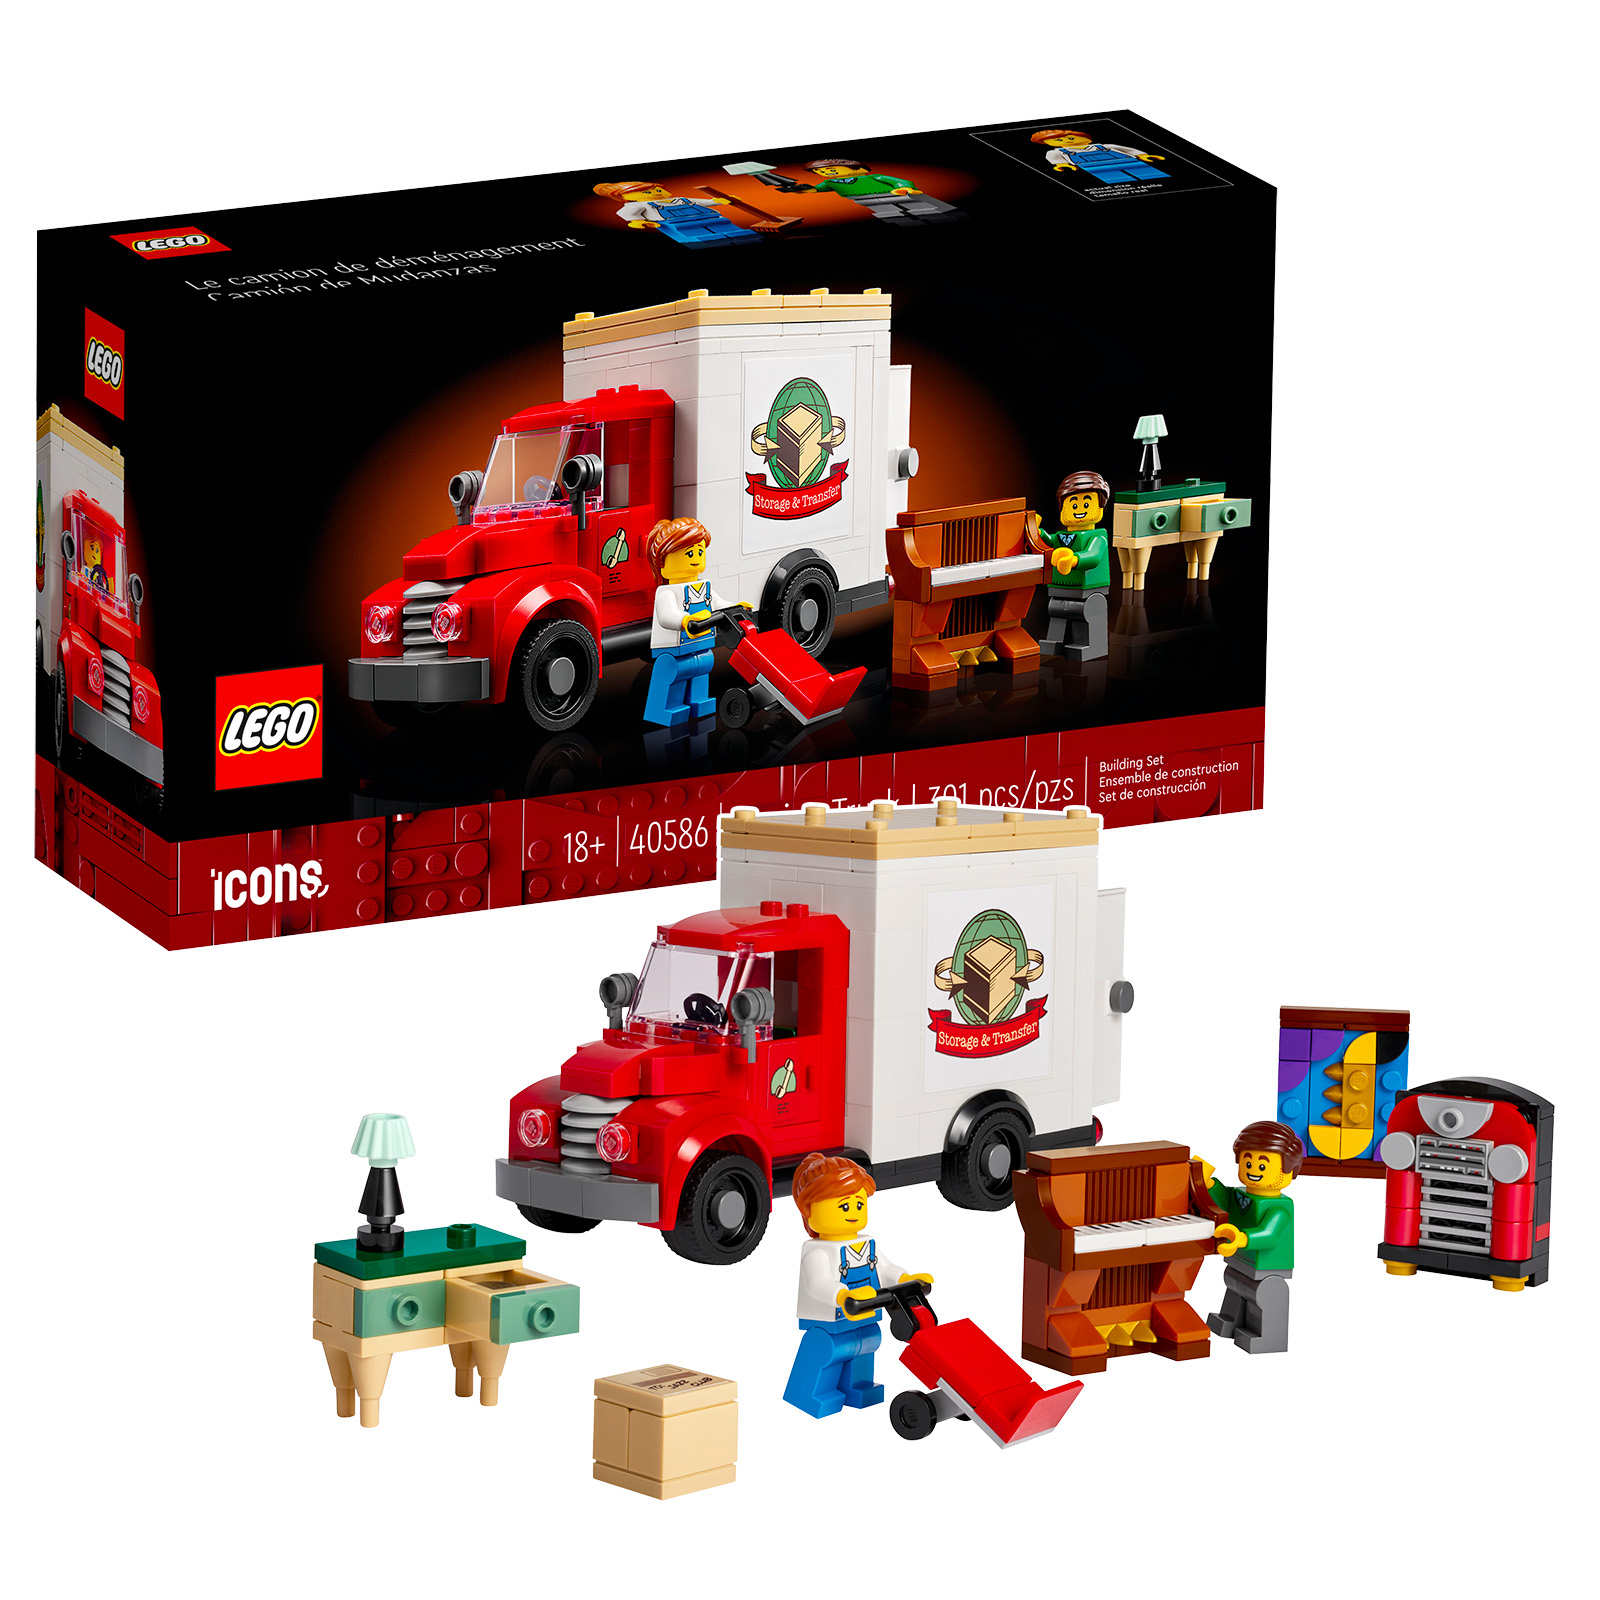 ▻ LEGO 40586 Moving Truck: first official visual of the next LEGO